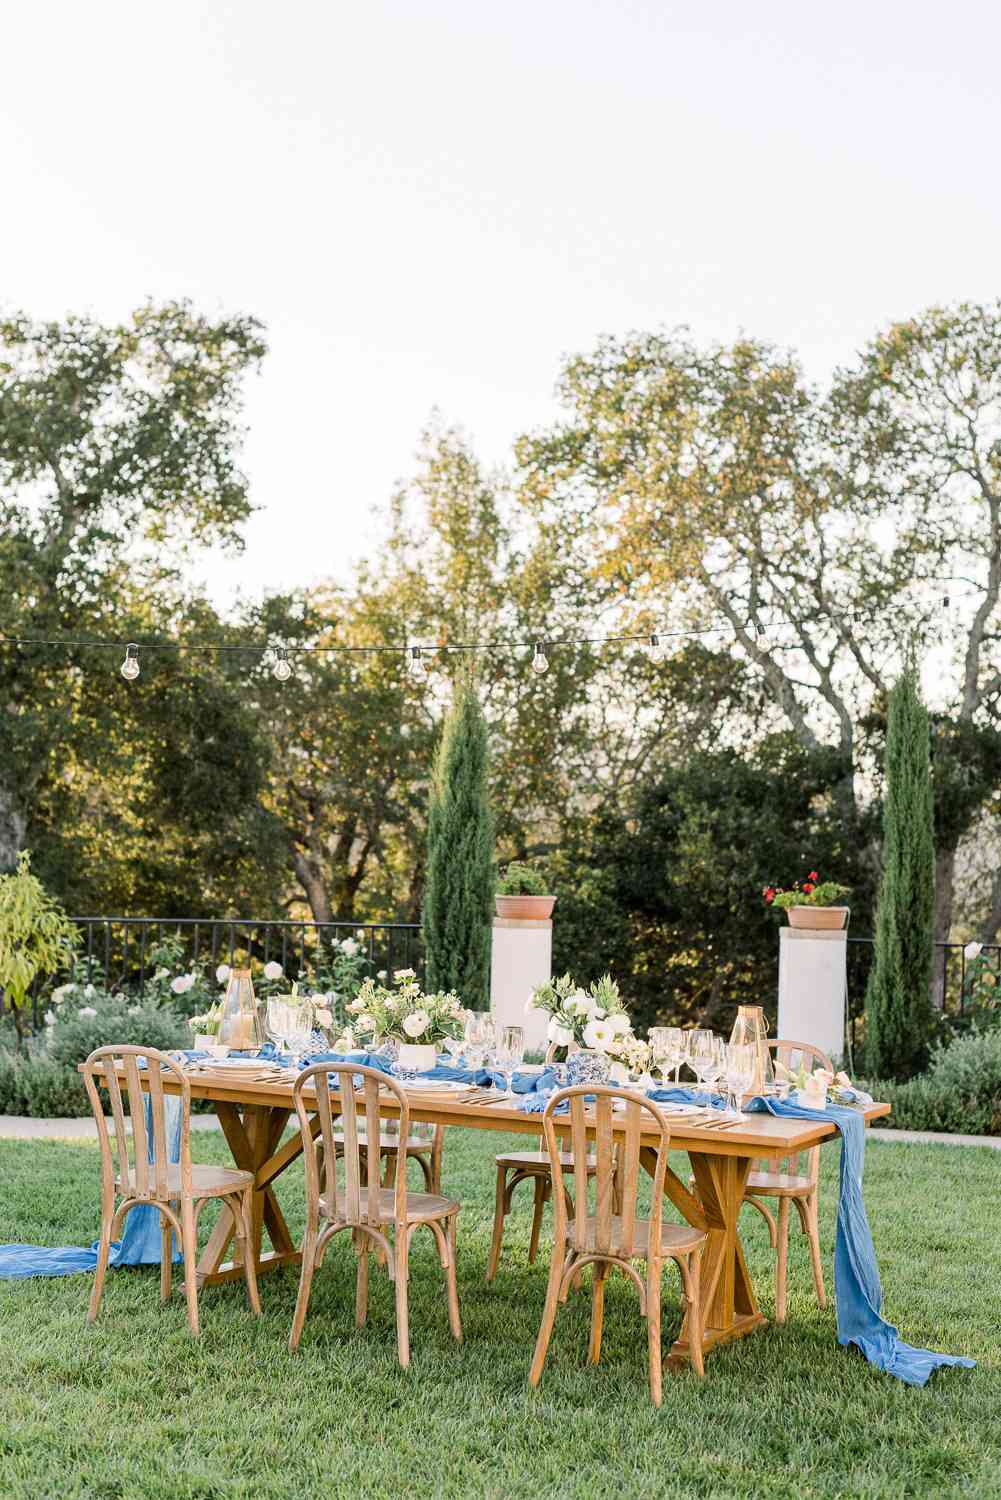 table set for six with flowers and blue linens